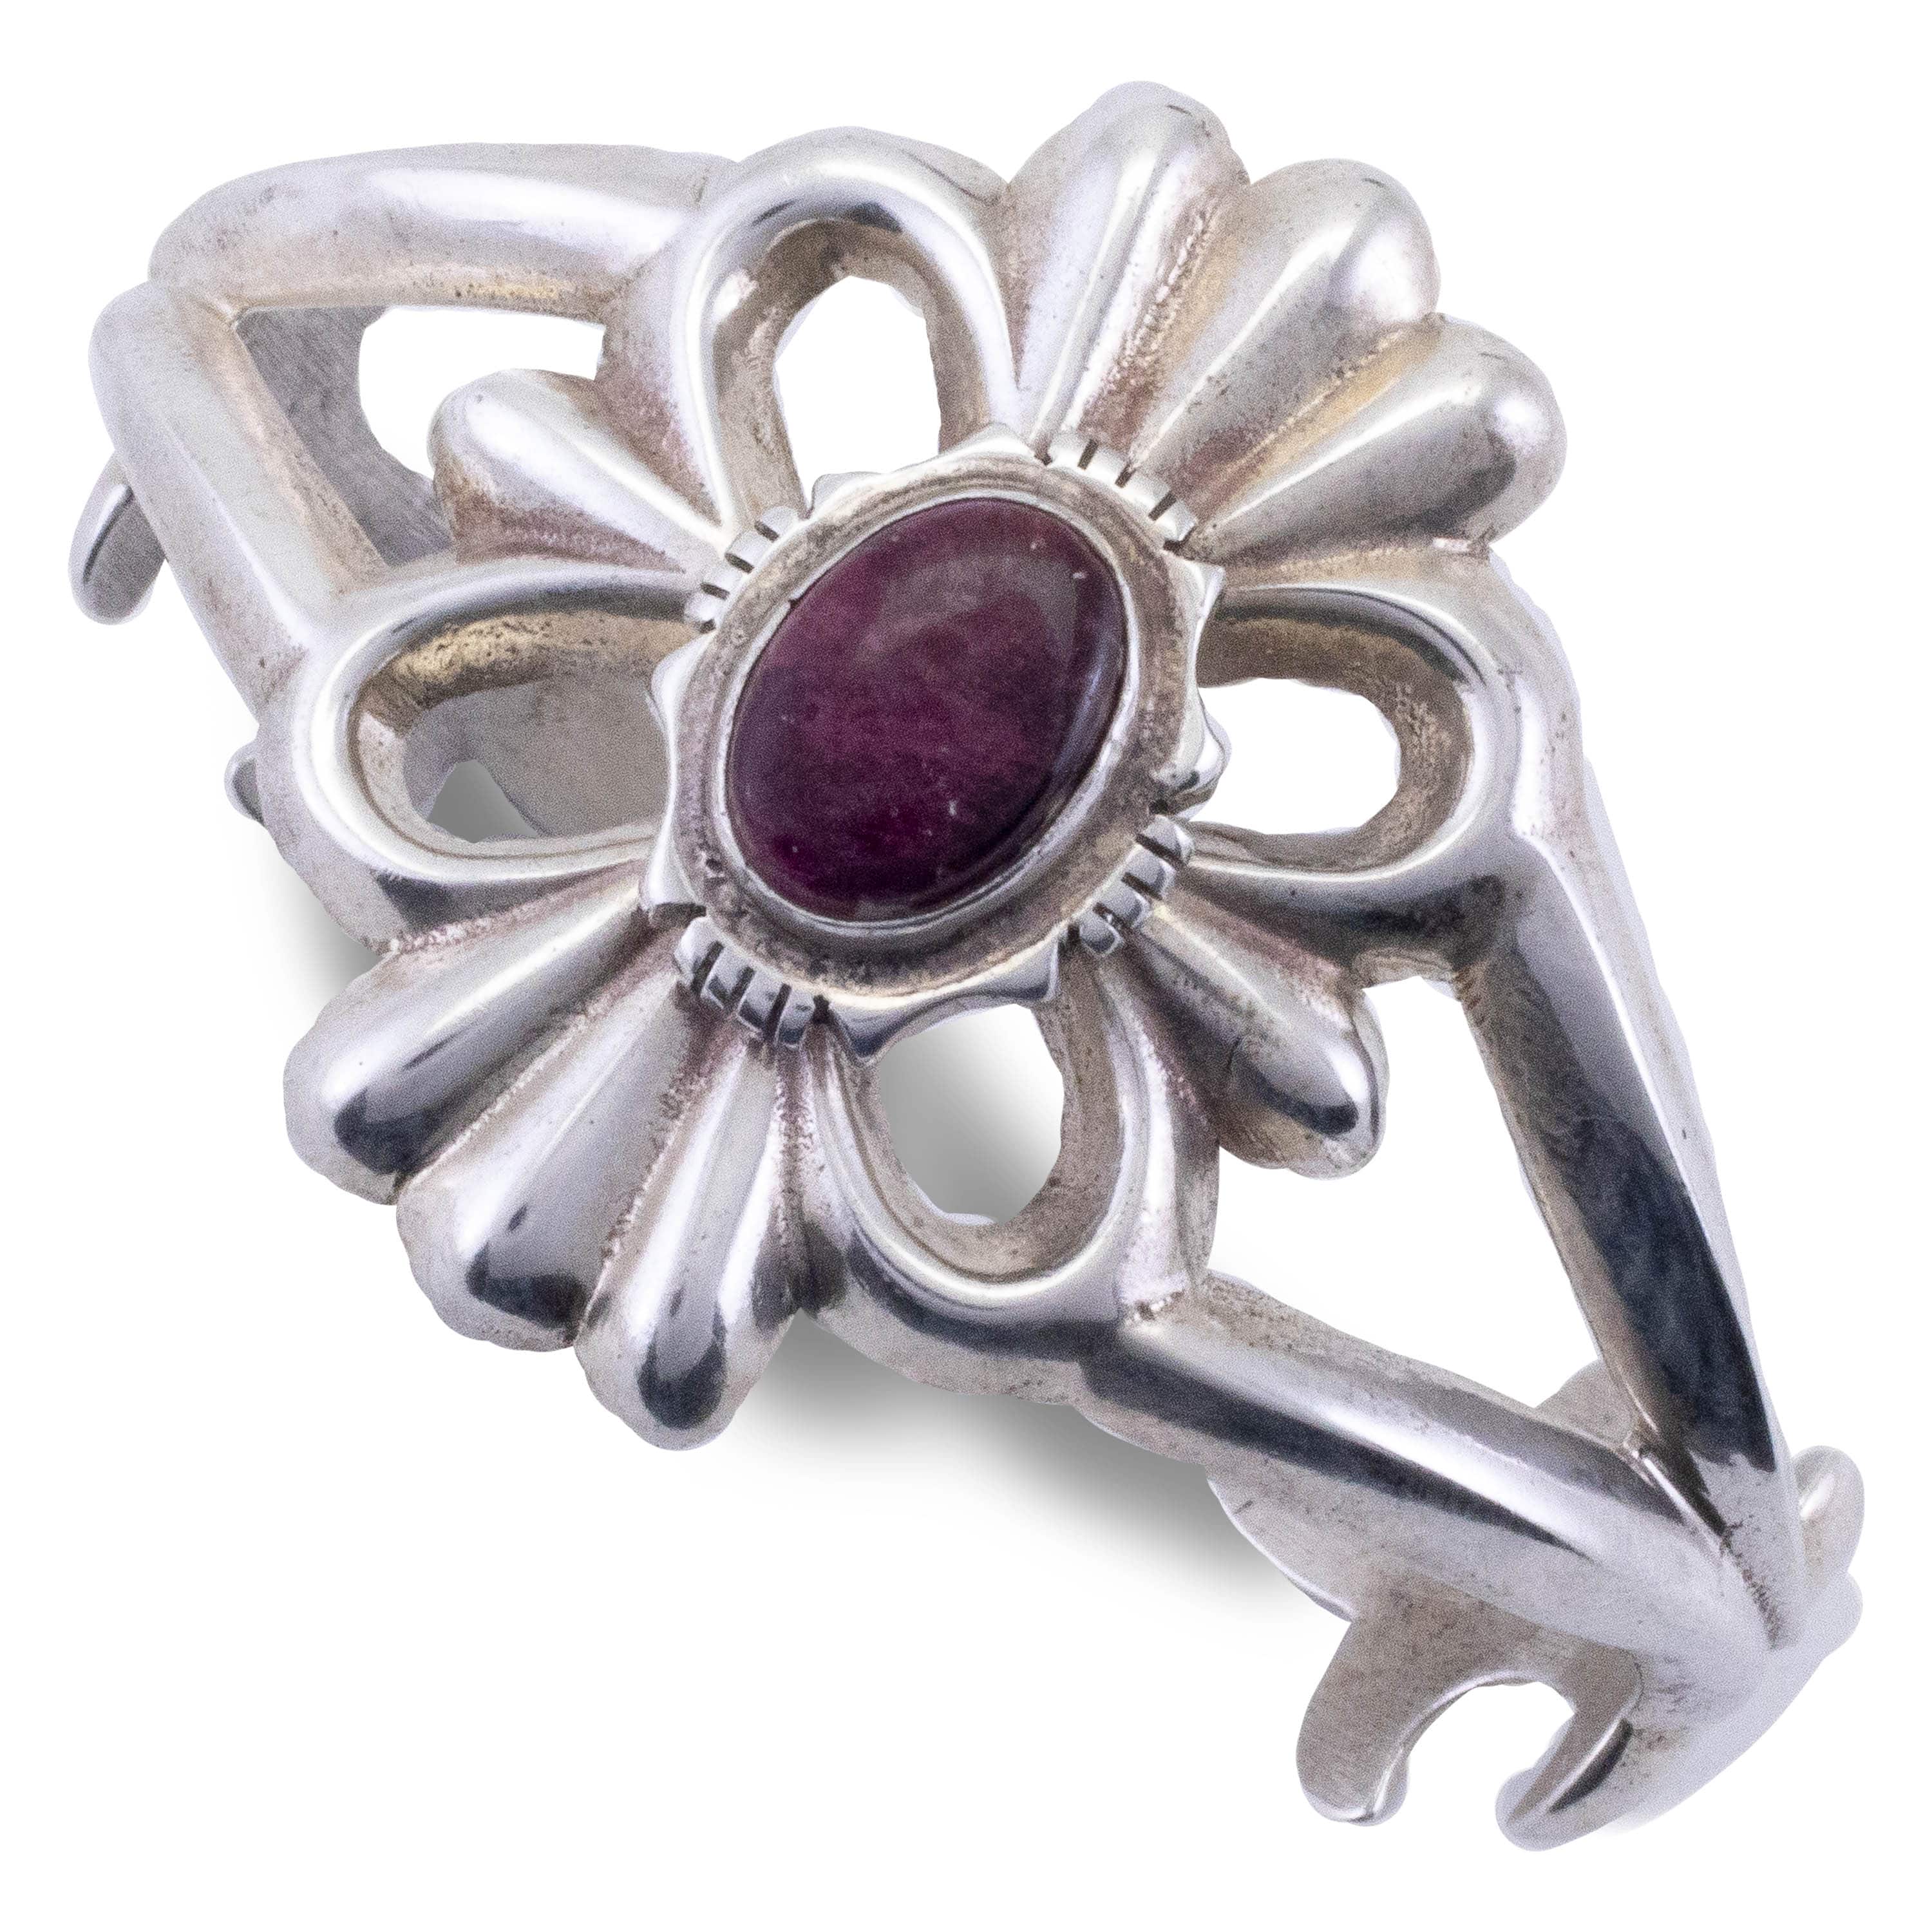 Kalifano Native American Jewelry Robert Chee Navajo Purple Spiny Oyster Shell Flower USA Native American Made 925 Sterling Silver Cuff NAB1500.010